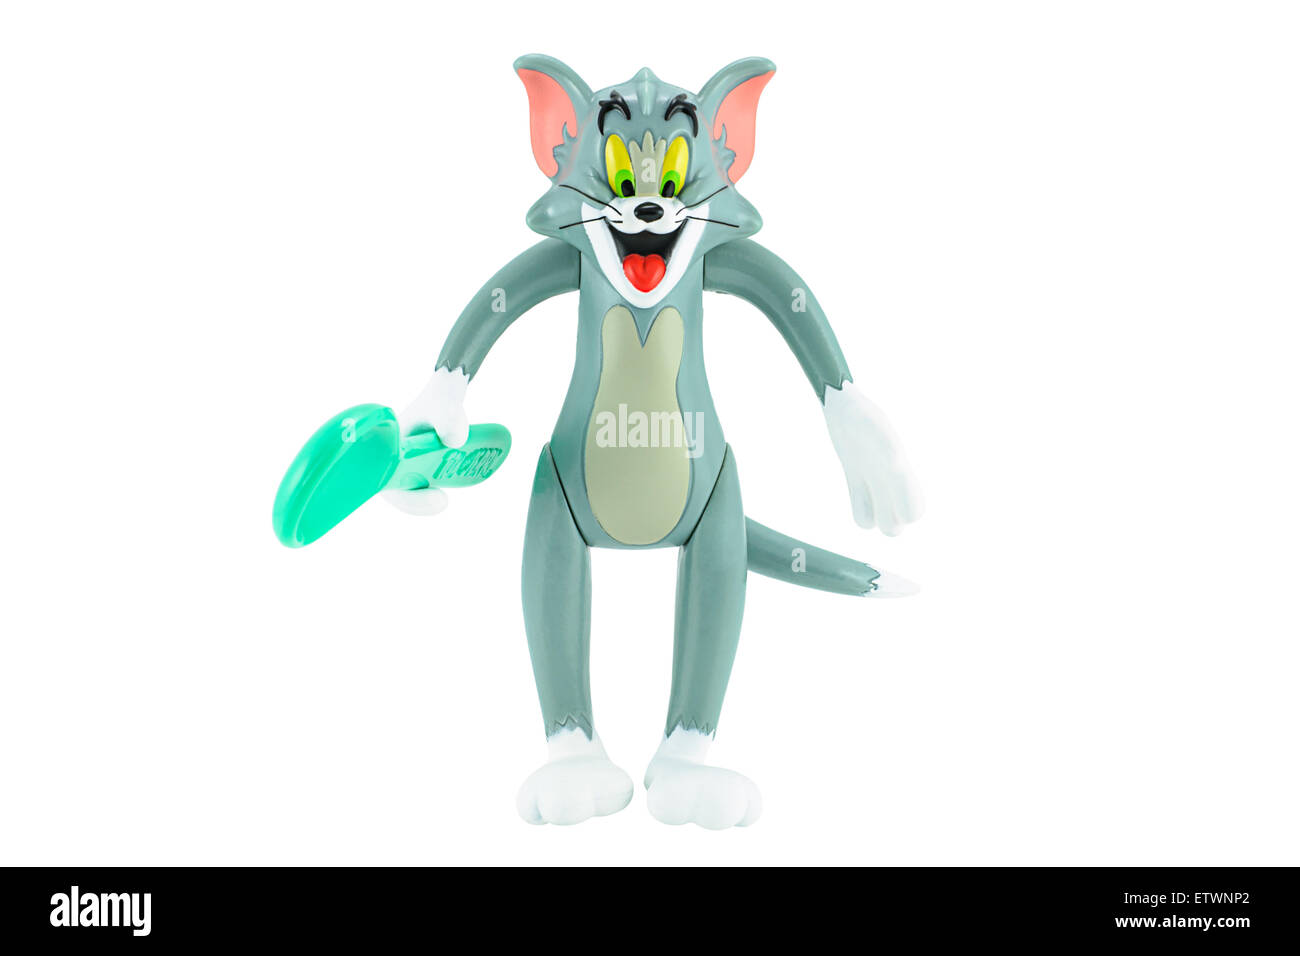 Bangkok,Thailand - February 17, 2015: Tom gray cat with spoon in hand toy character form Tom and Jerry animation cartoon. Stock Photo